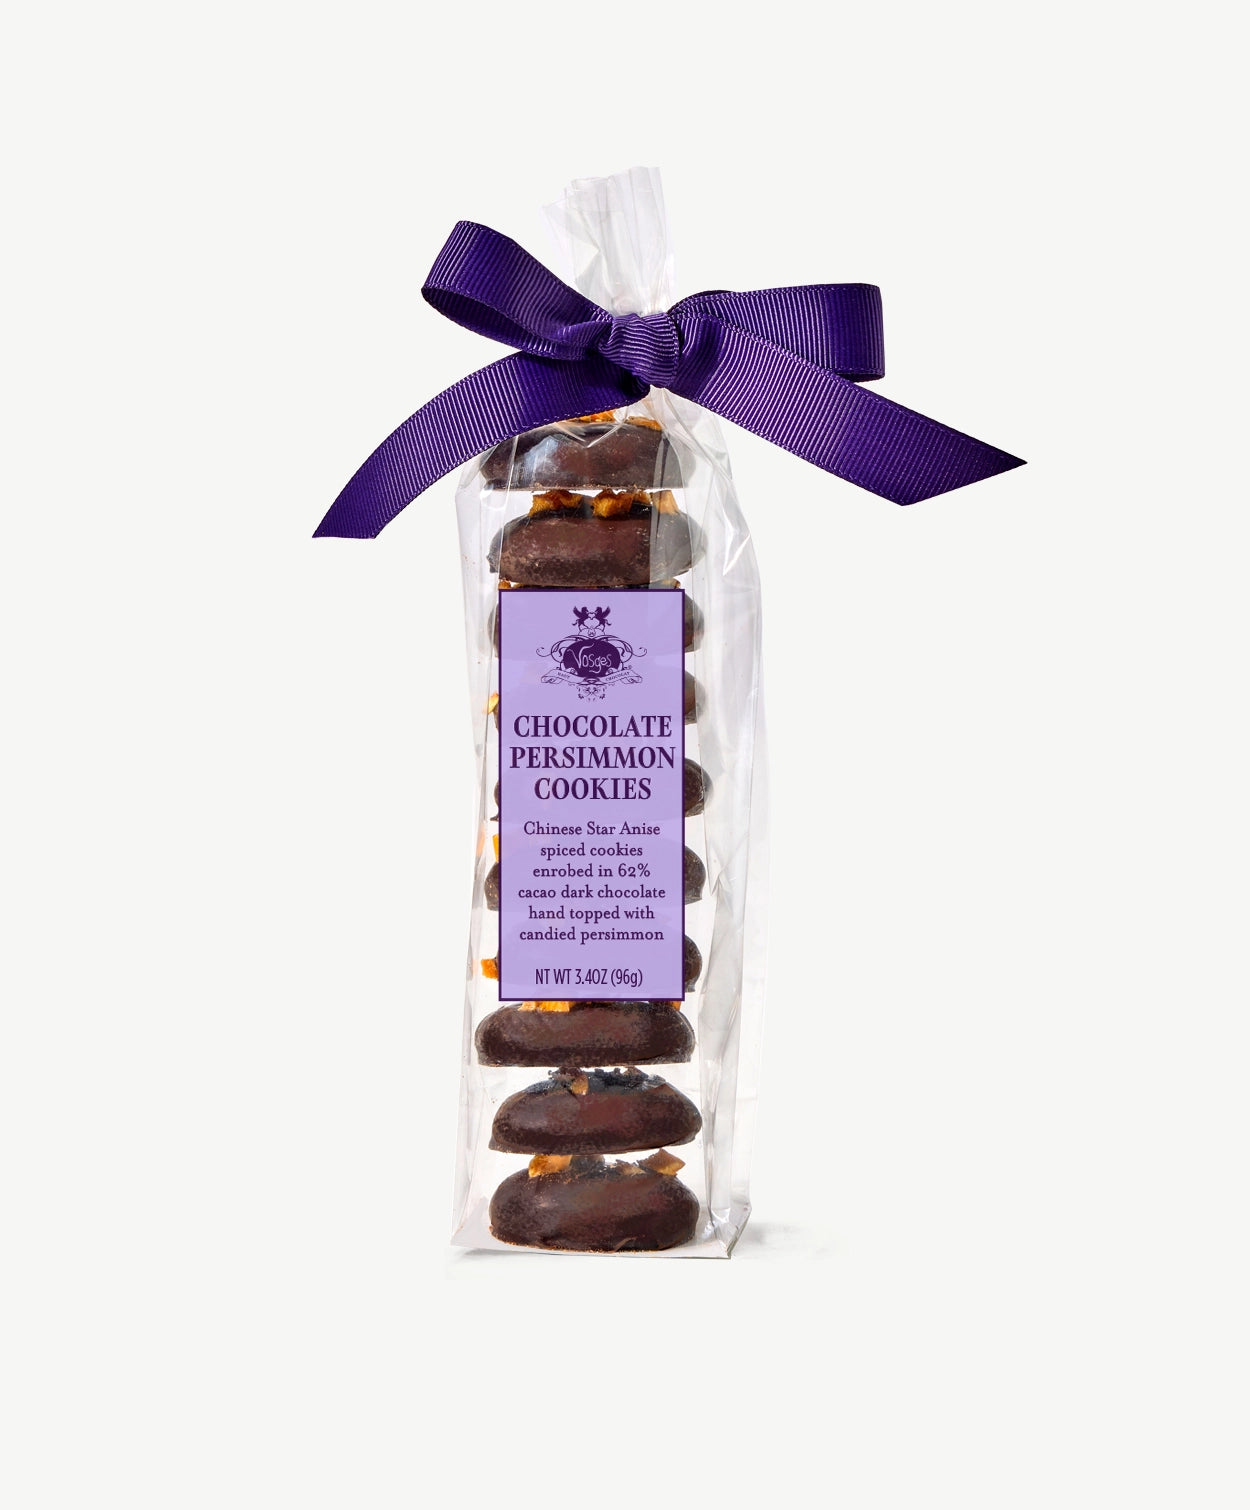 Tall stack of Vosges Chocolate Dipped Persimmon Cookies in a clear plastic wrapper bearing a light purple label, tied with a dark purple bow on a grey background.